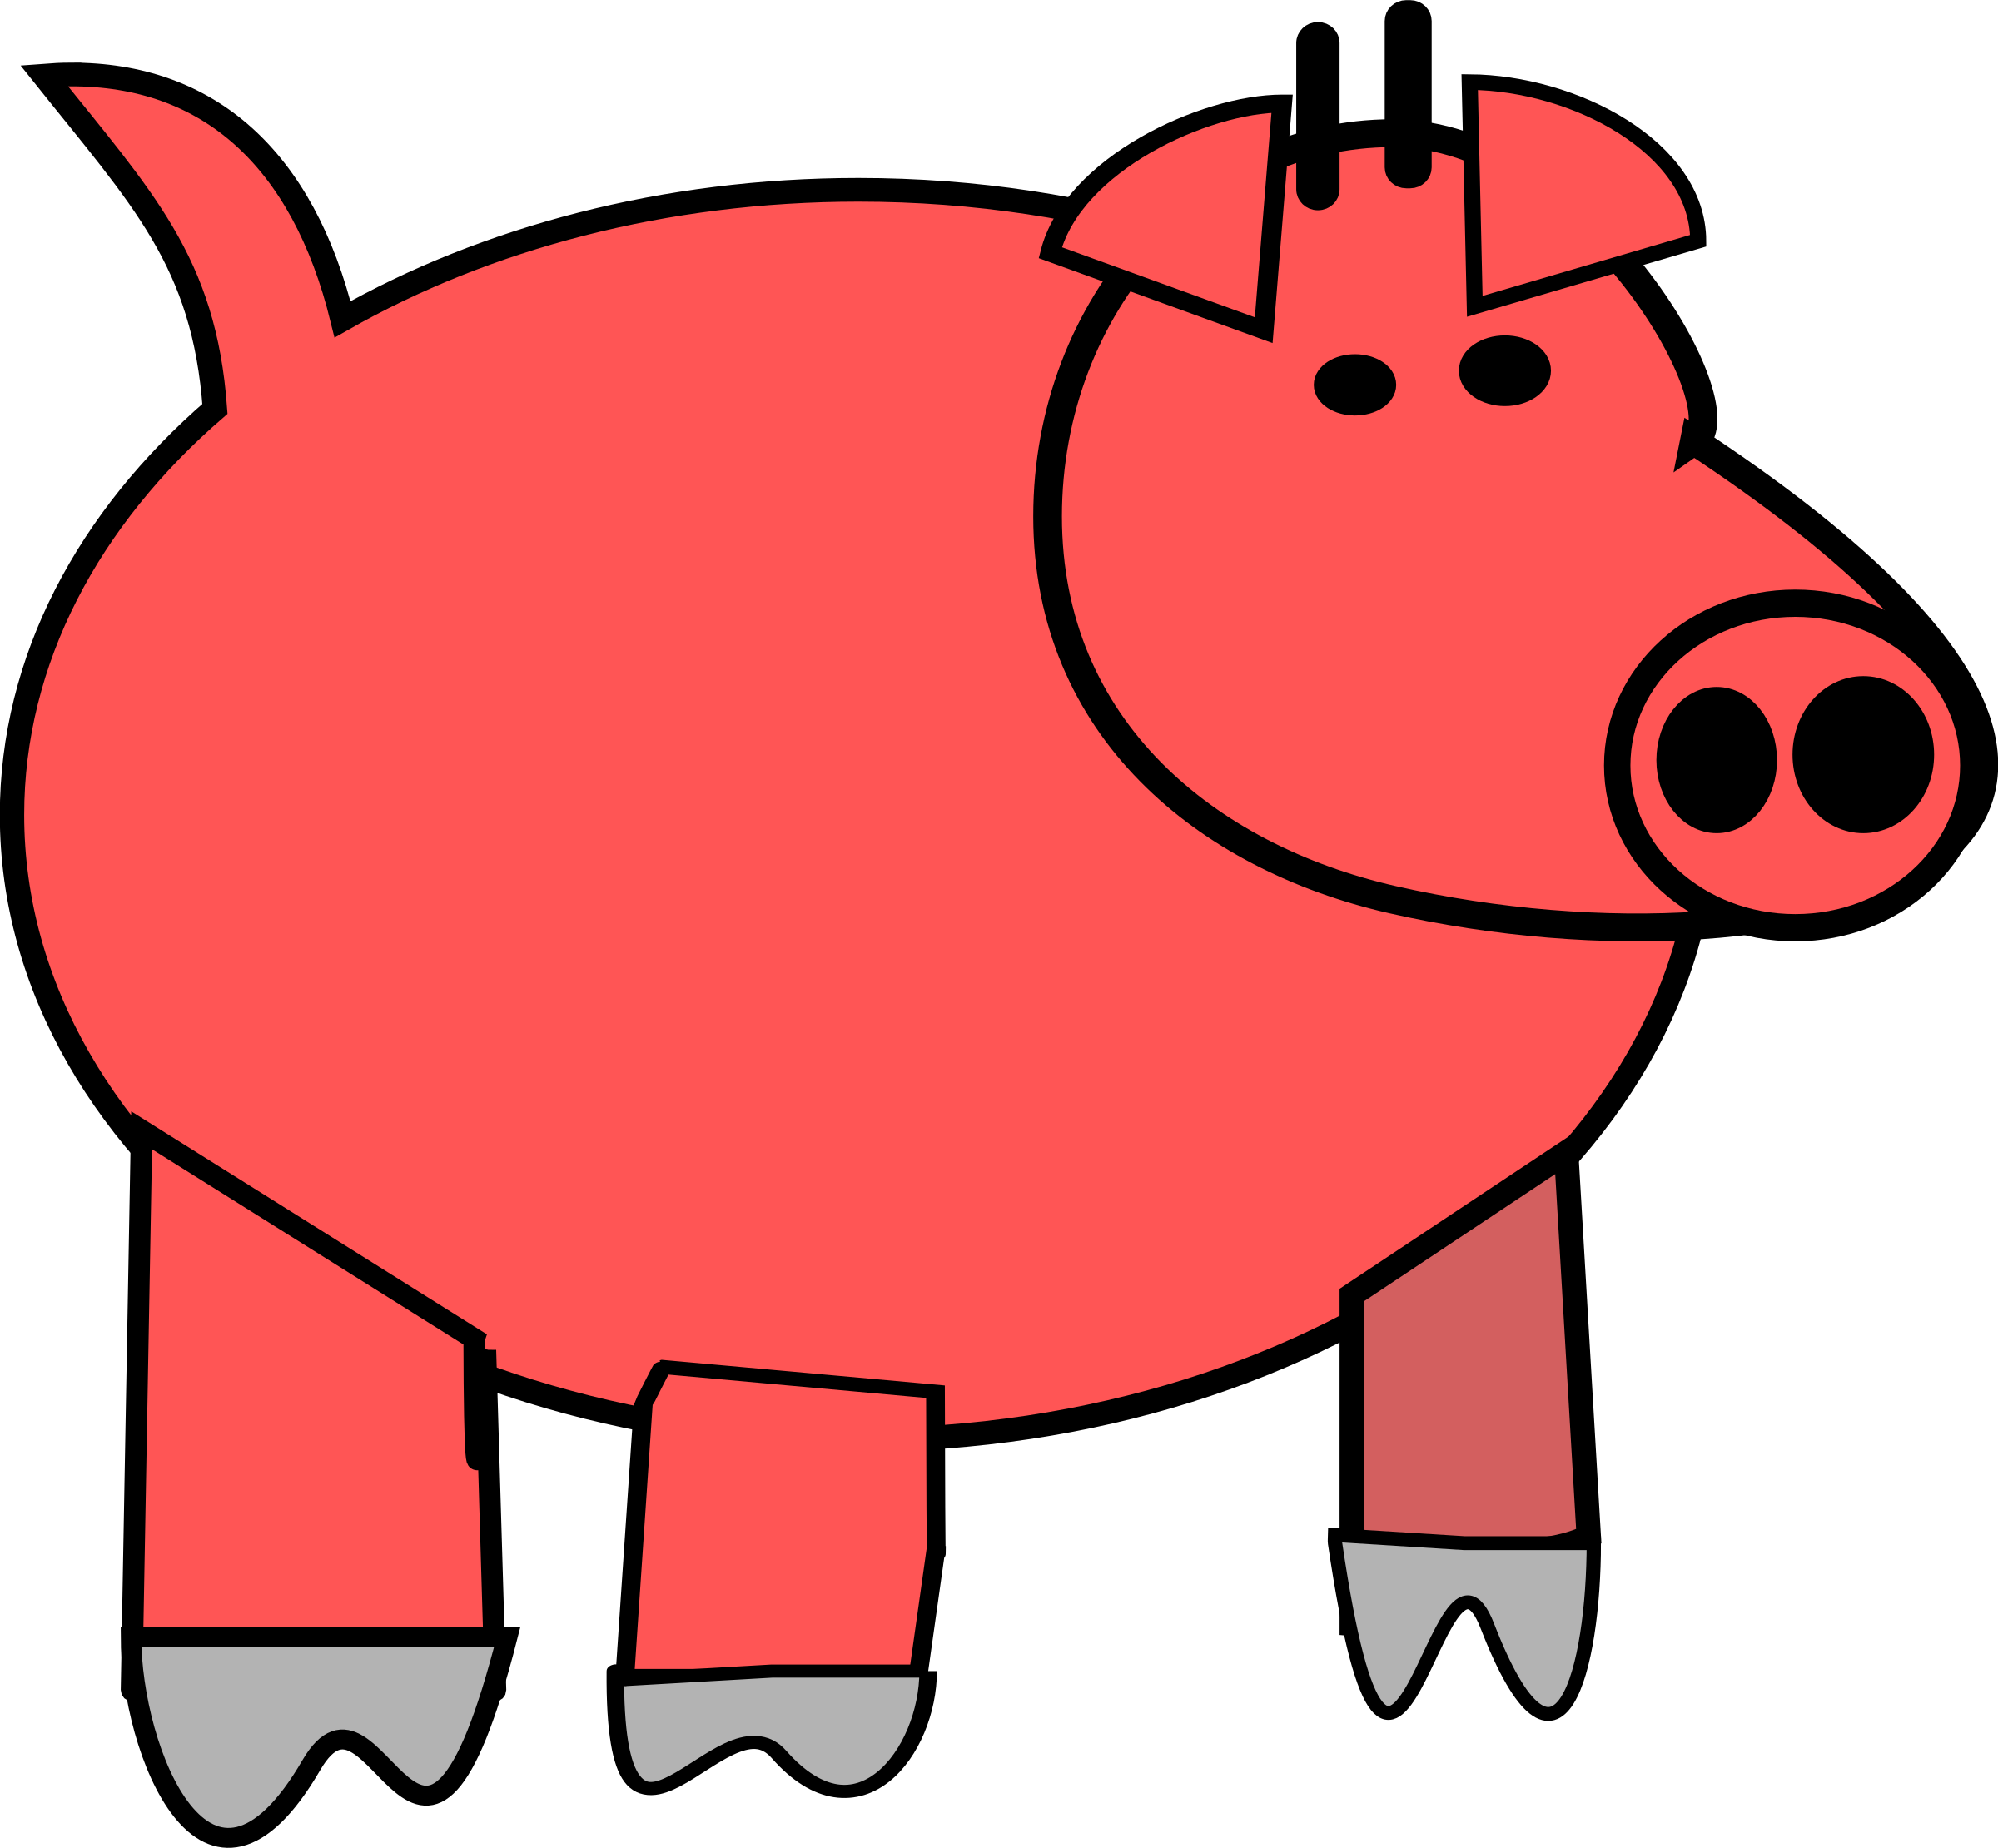 Pin by candice on. Pigs clipart couple